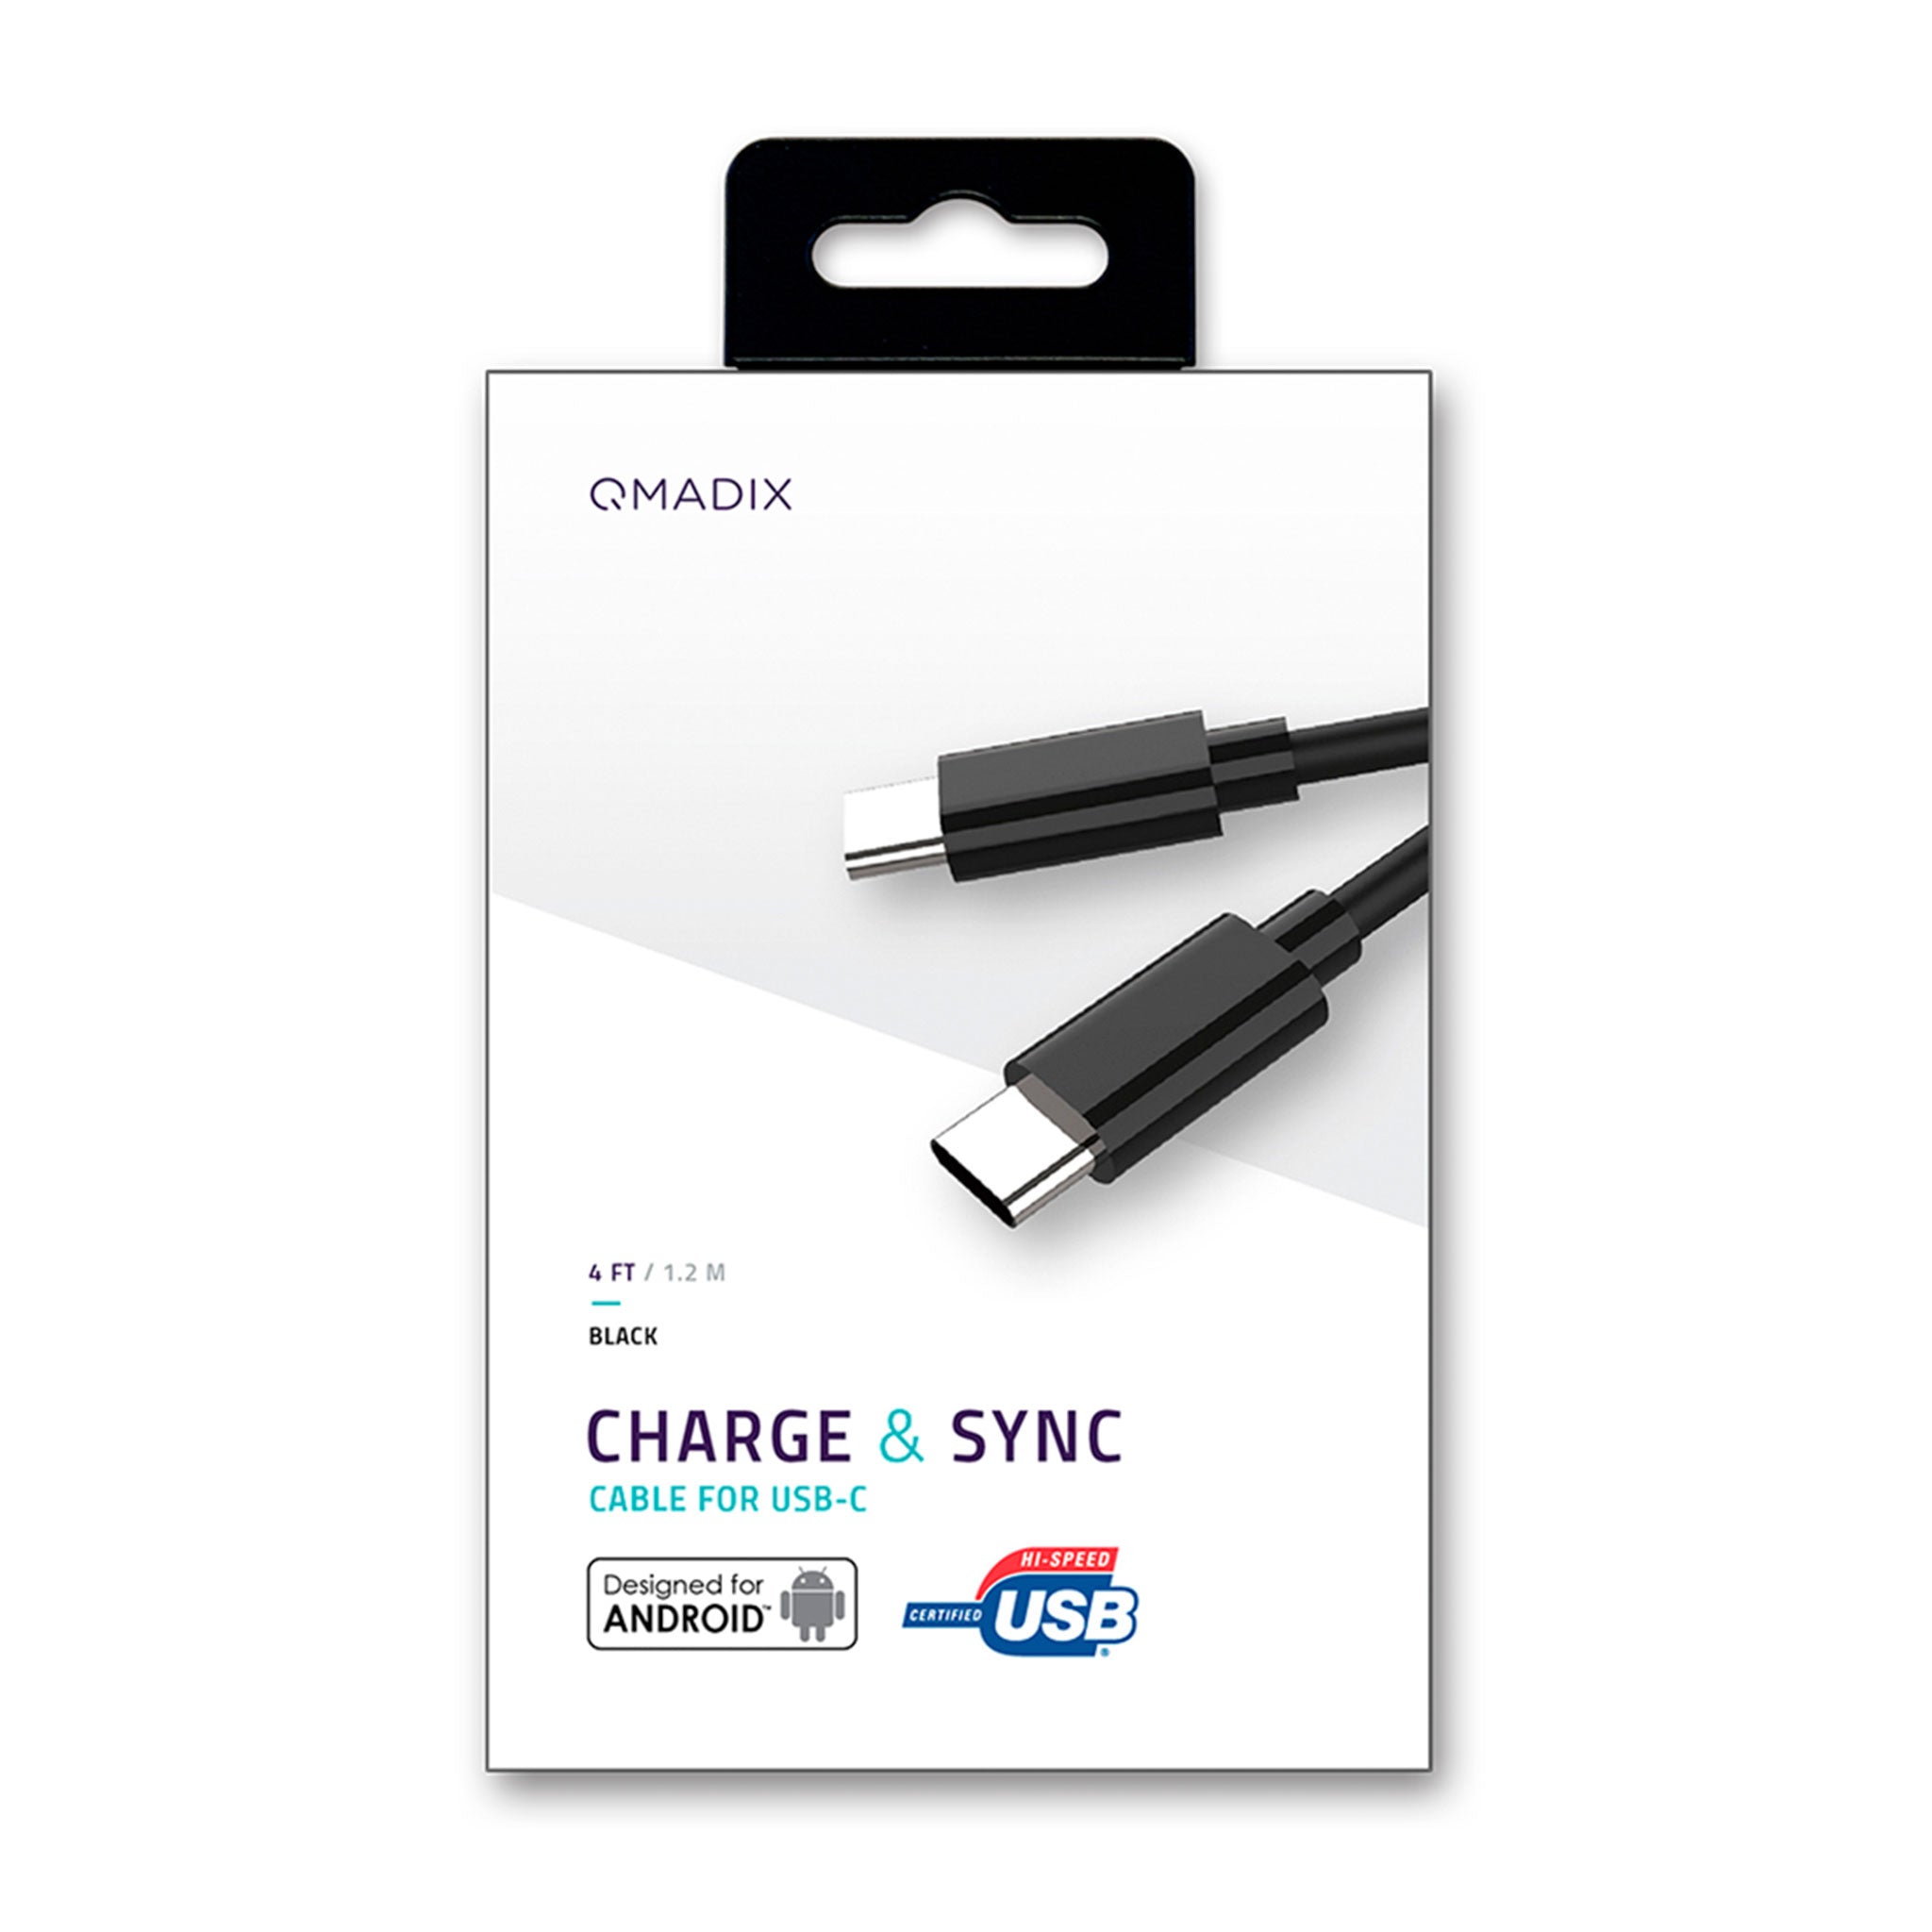 Qmadix - Charging Data Sync Usb C To Usb C Cable 4ft - Black